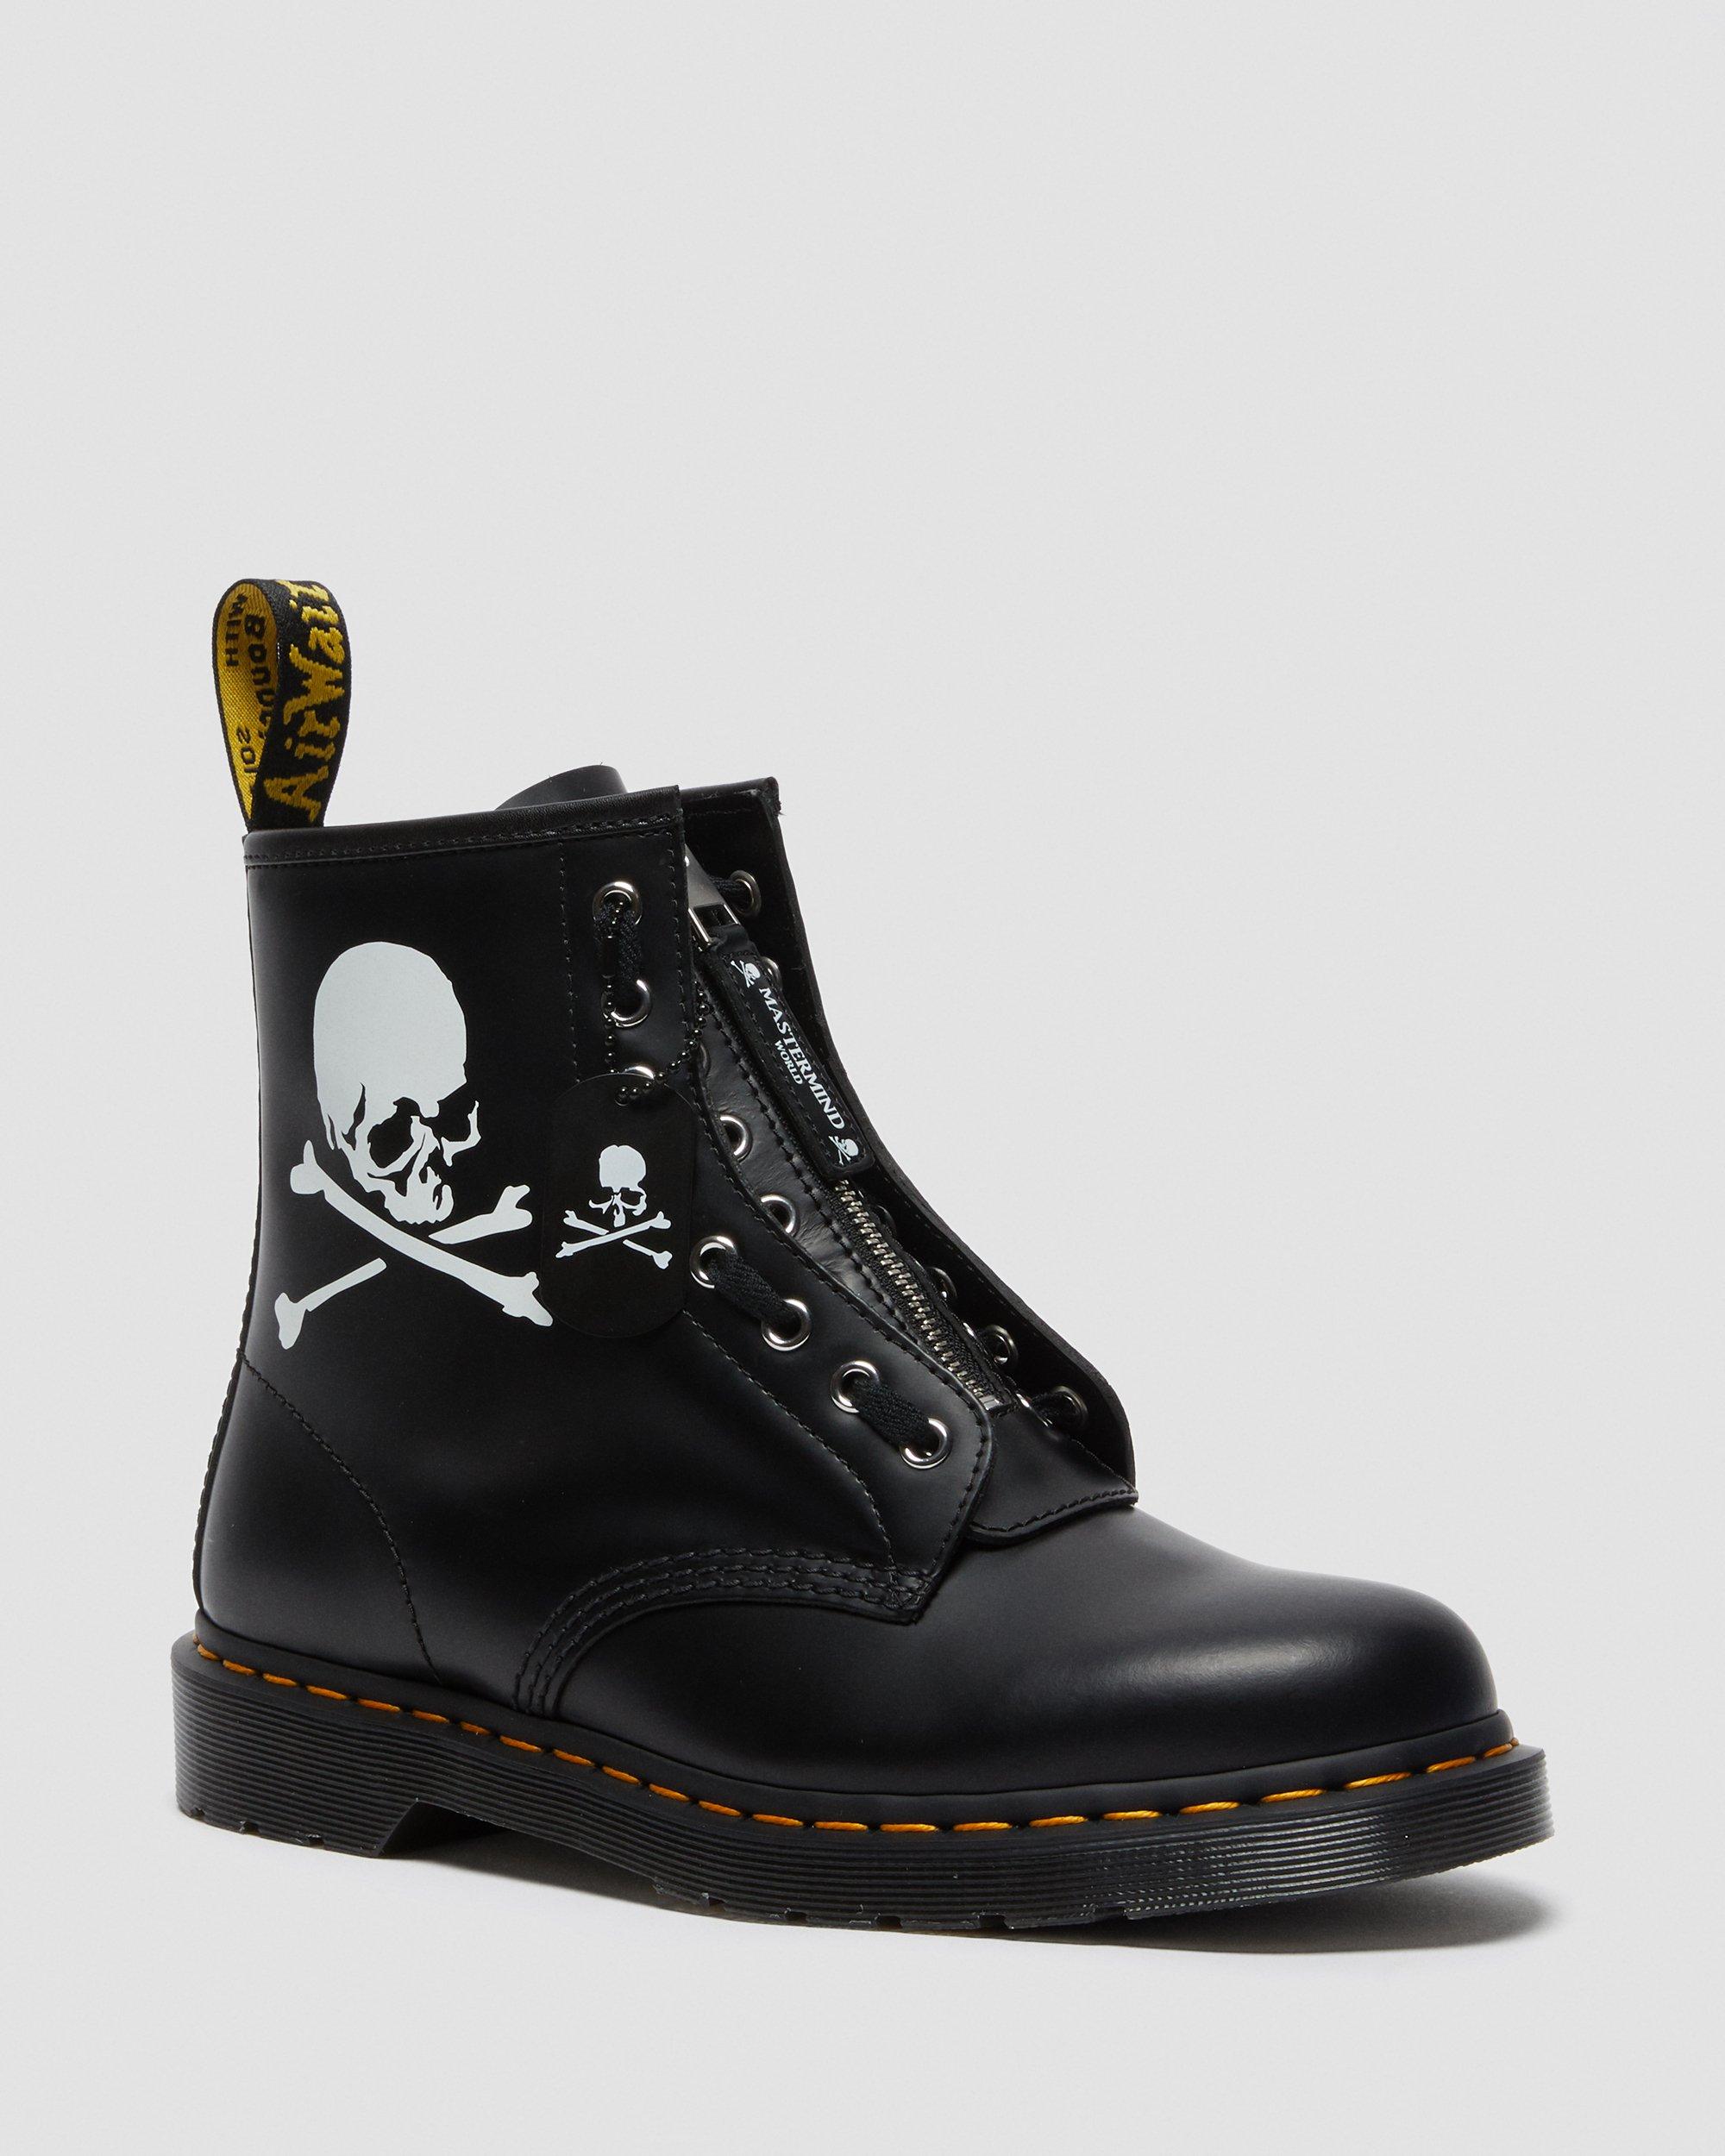 1460 MASTERMIND WORLD LEATHER BOOTS in Black | Dr. Martens